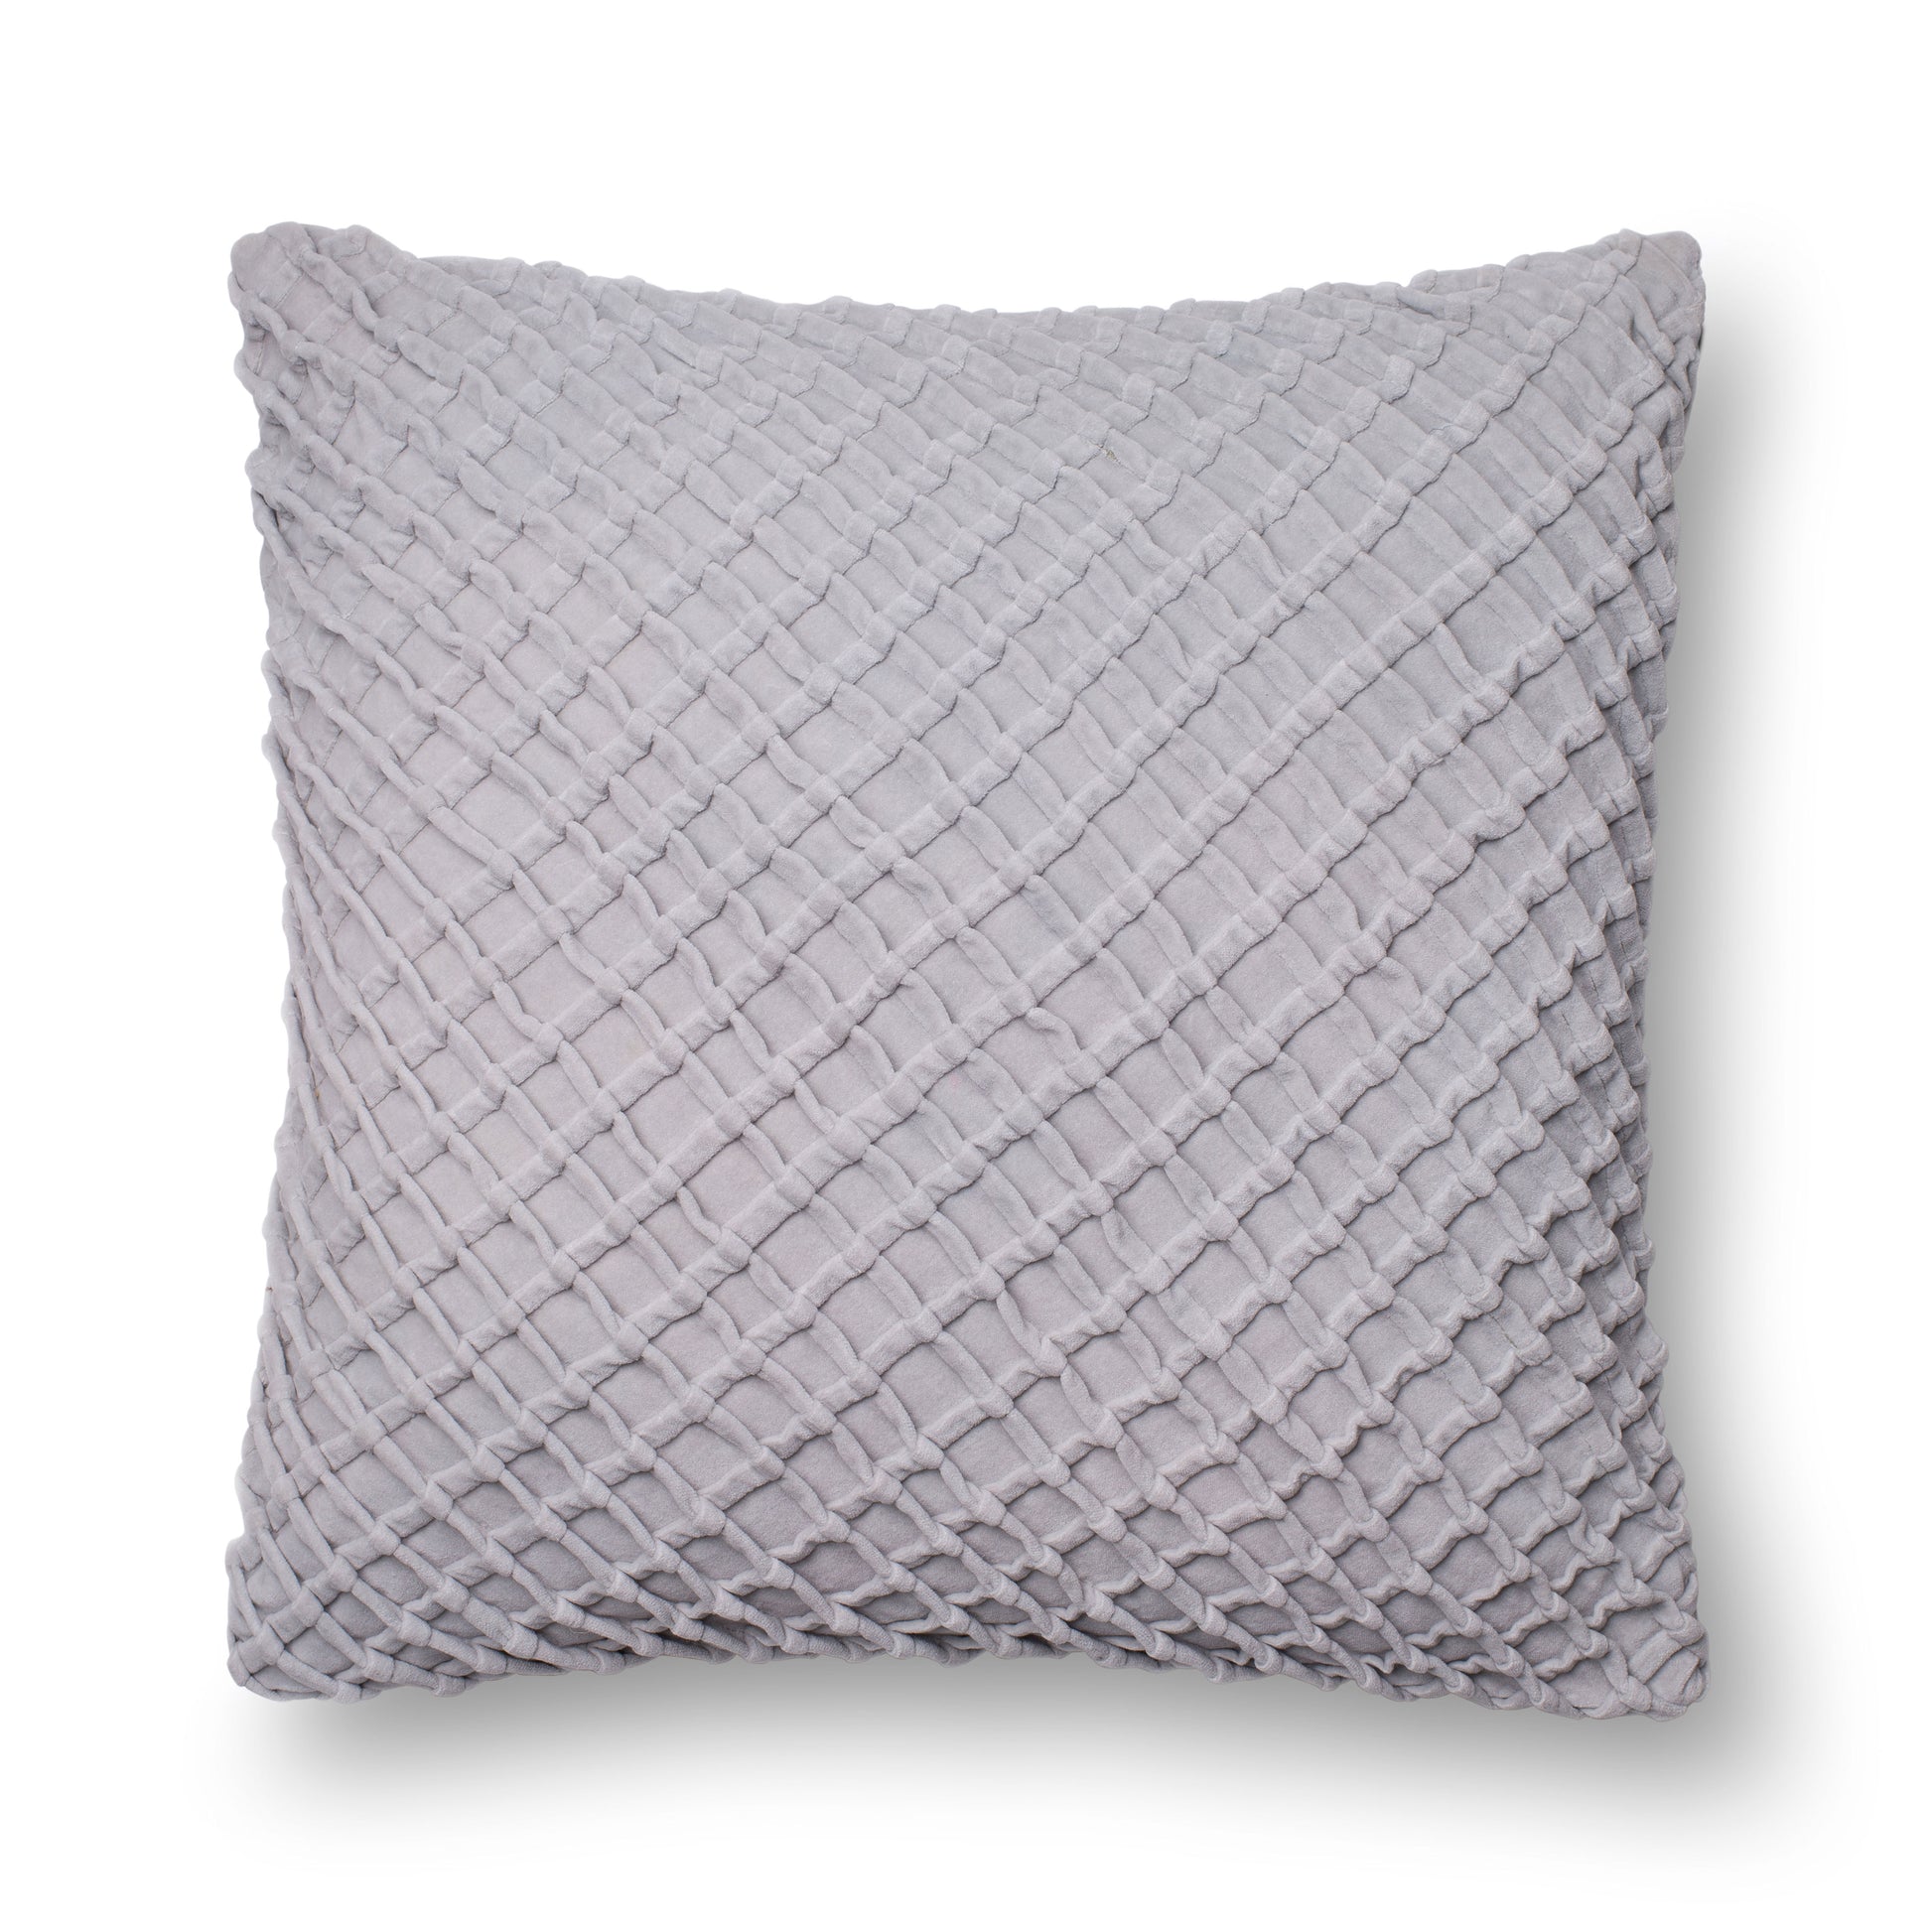 Photo of a pillow;  P0125 Grey 22" x 22" Cover w/Poly Pillow